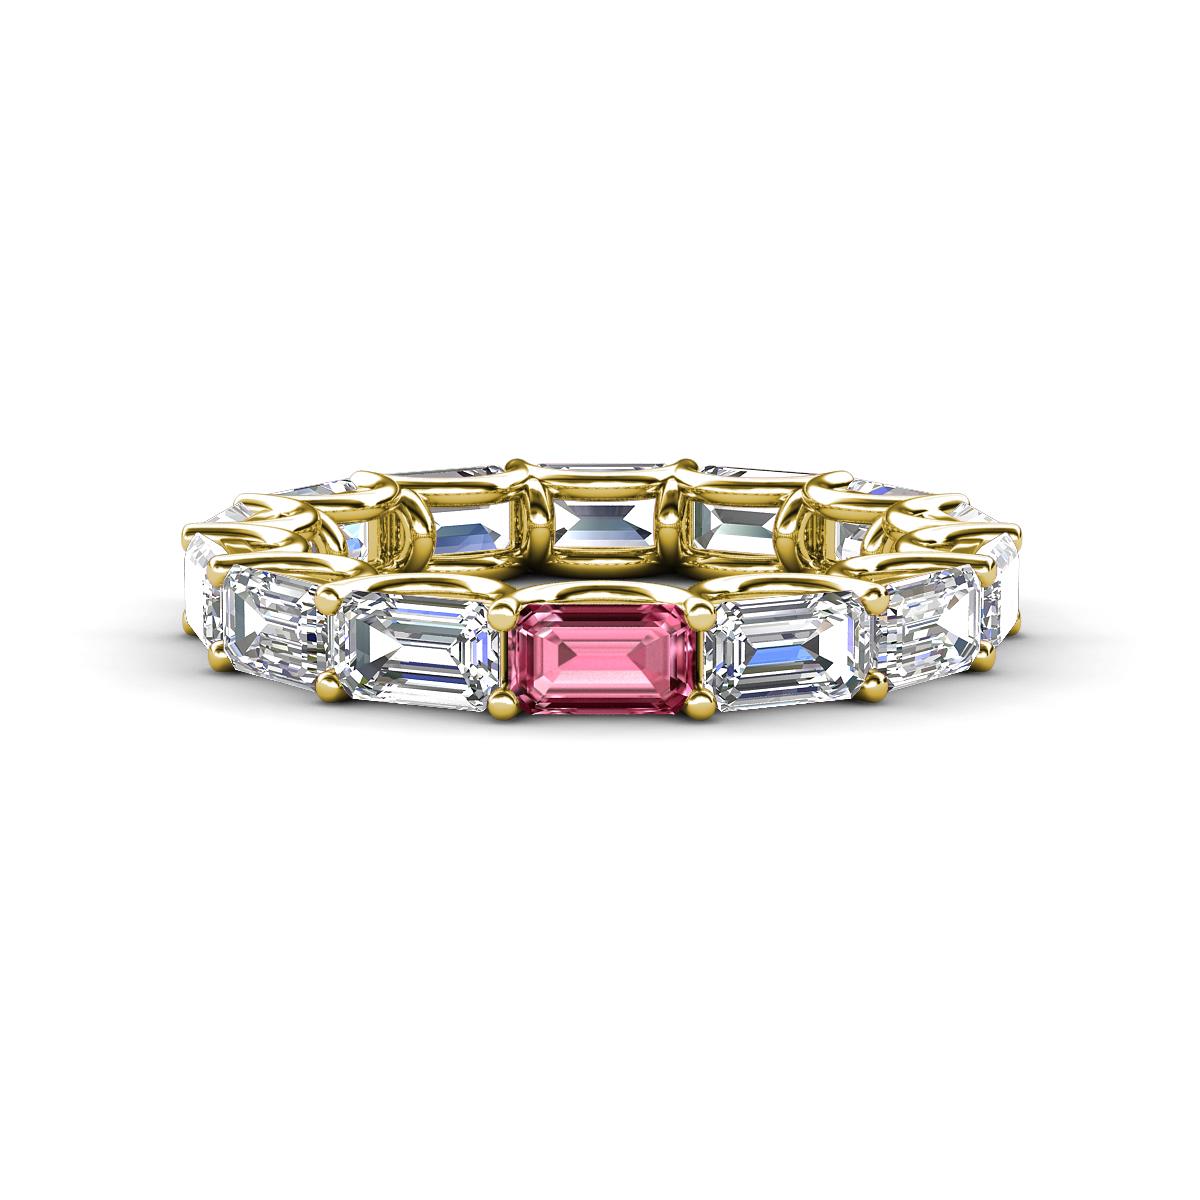 Beverly 5x3 mm Emerald Cut Forever One Moissanite and Pink Tourmaline Eternity Band 